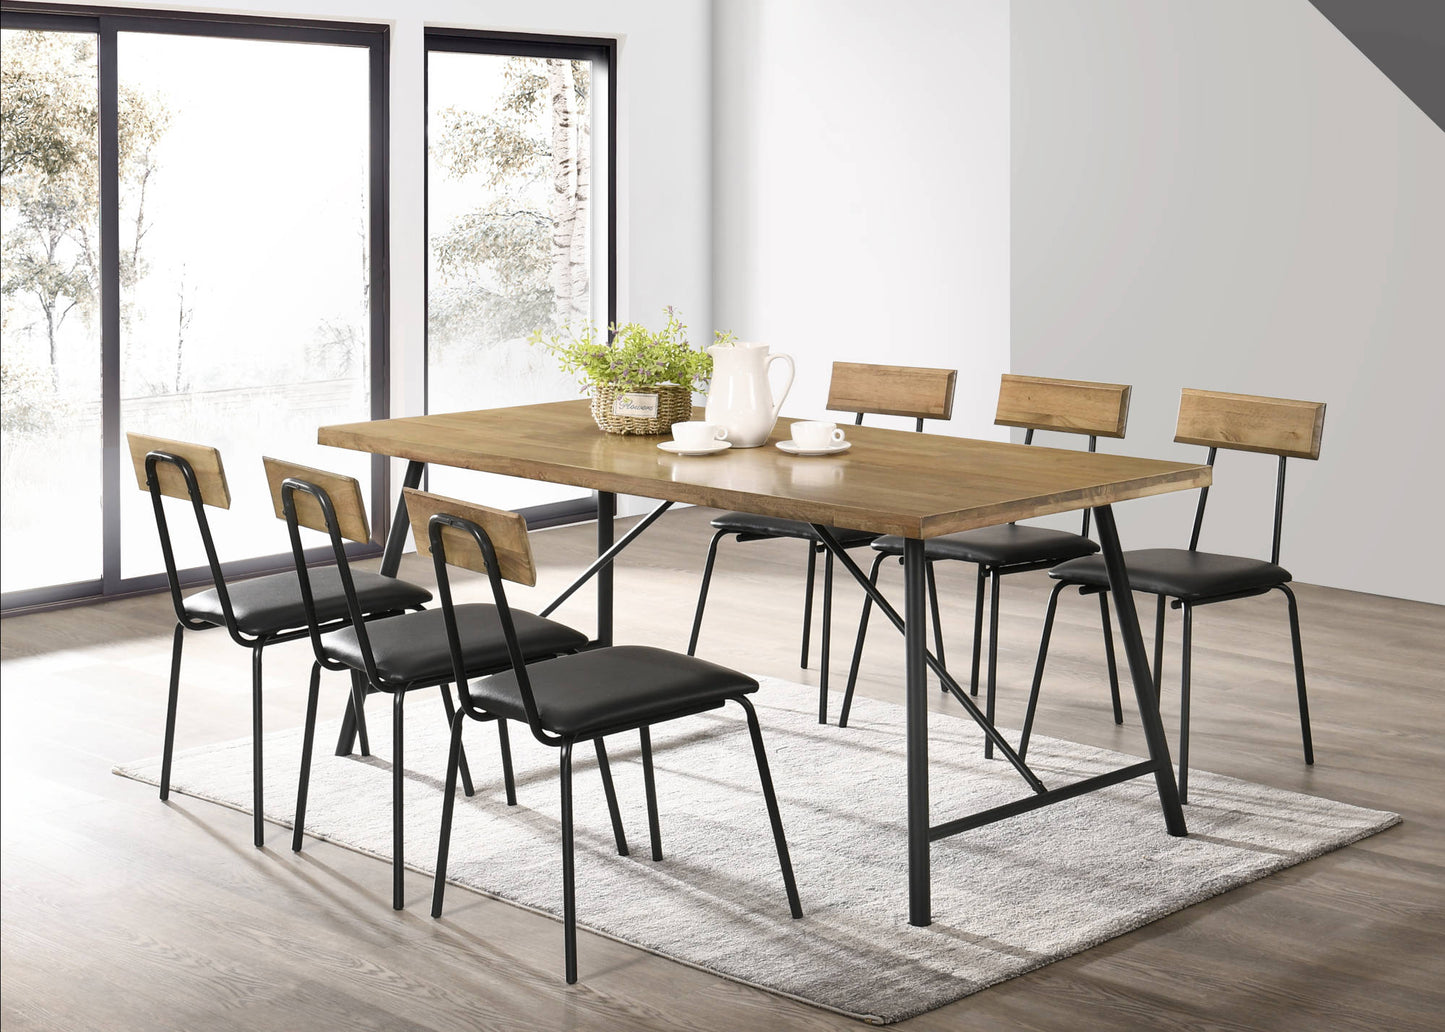 1.6m Owen Dining Table Set – 1 Dining Table + 6 Chairs